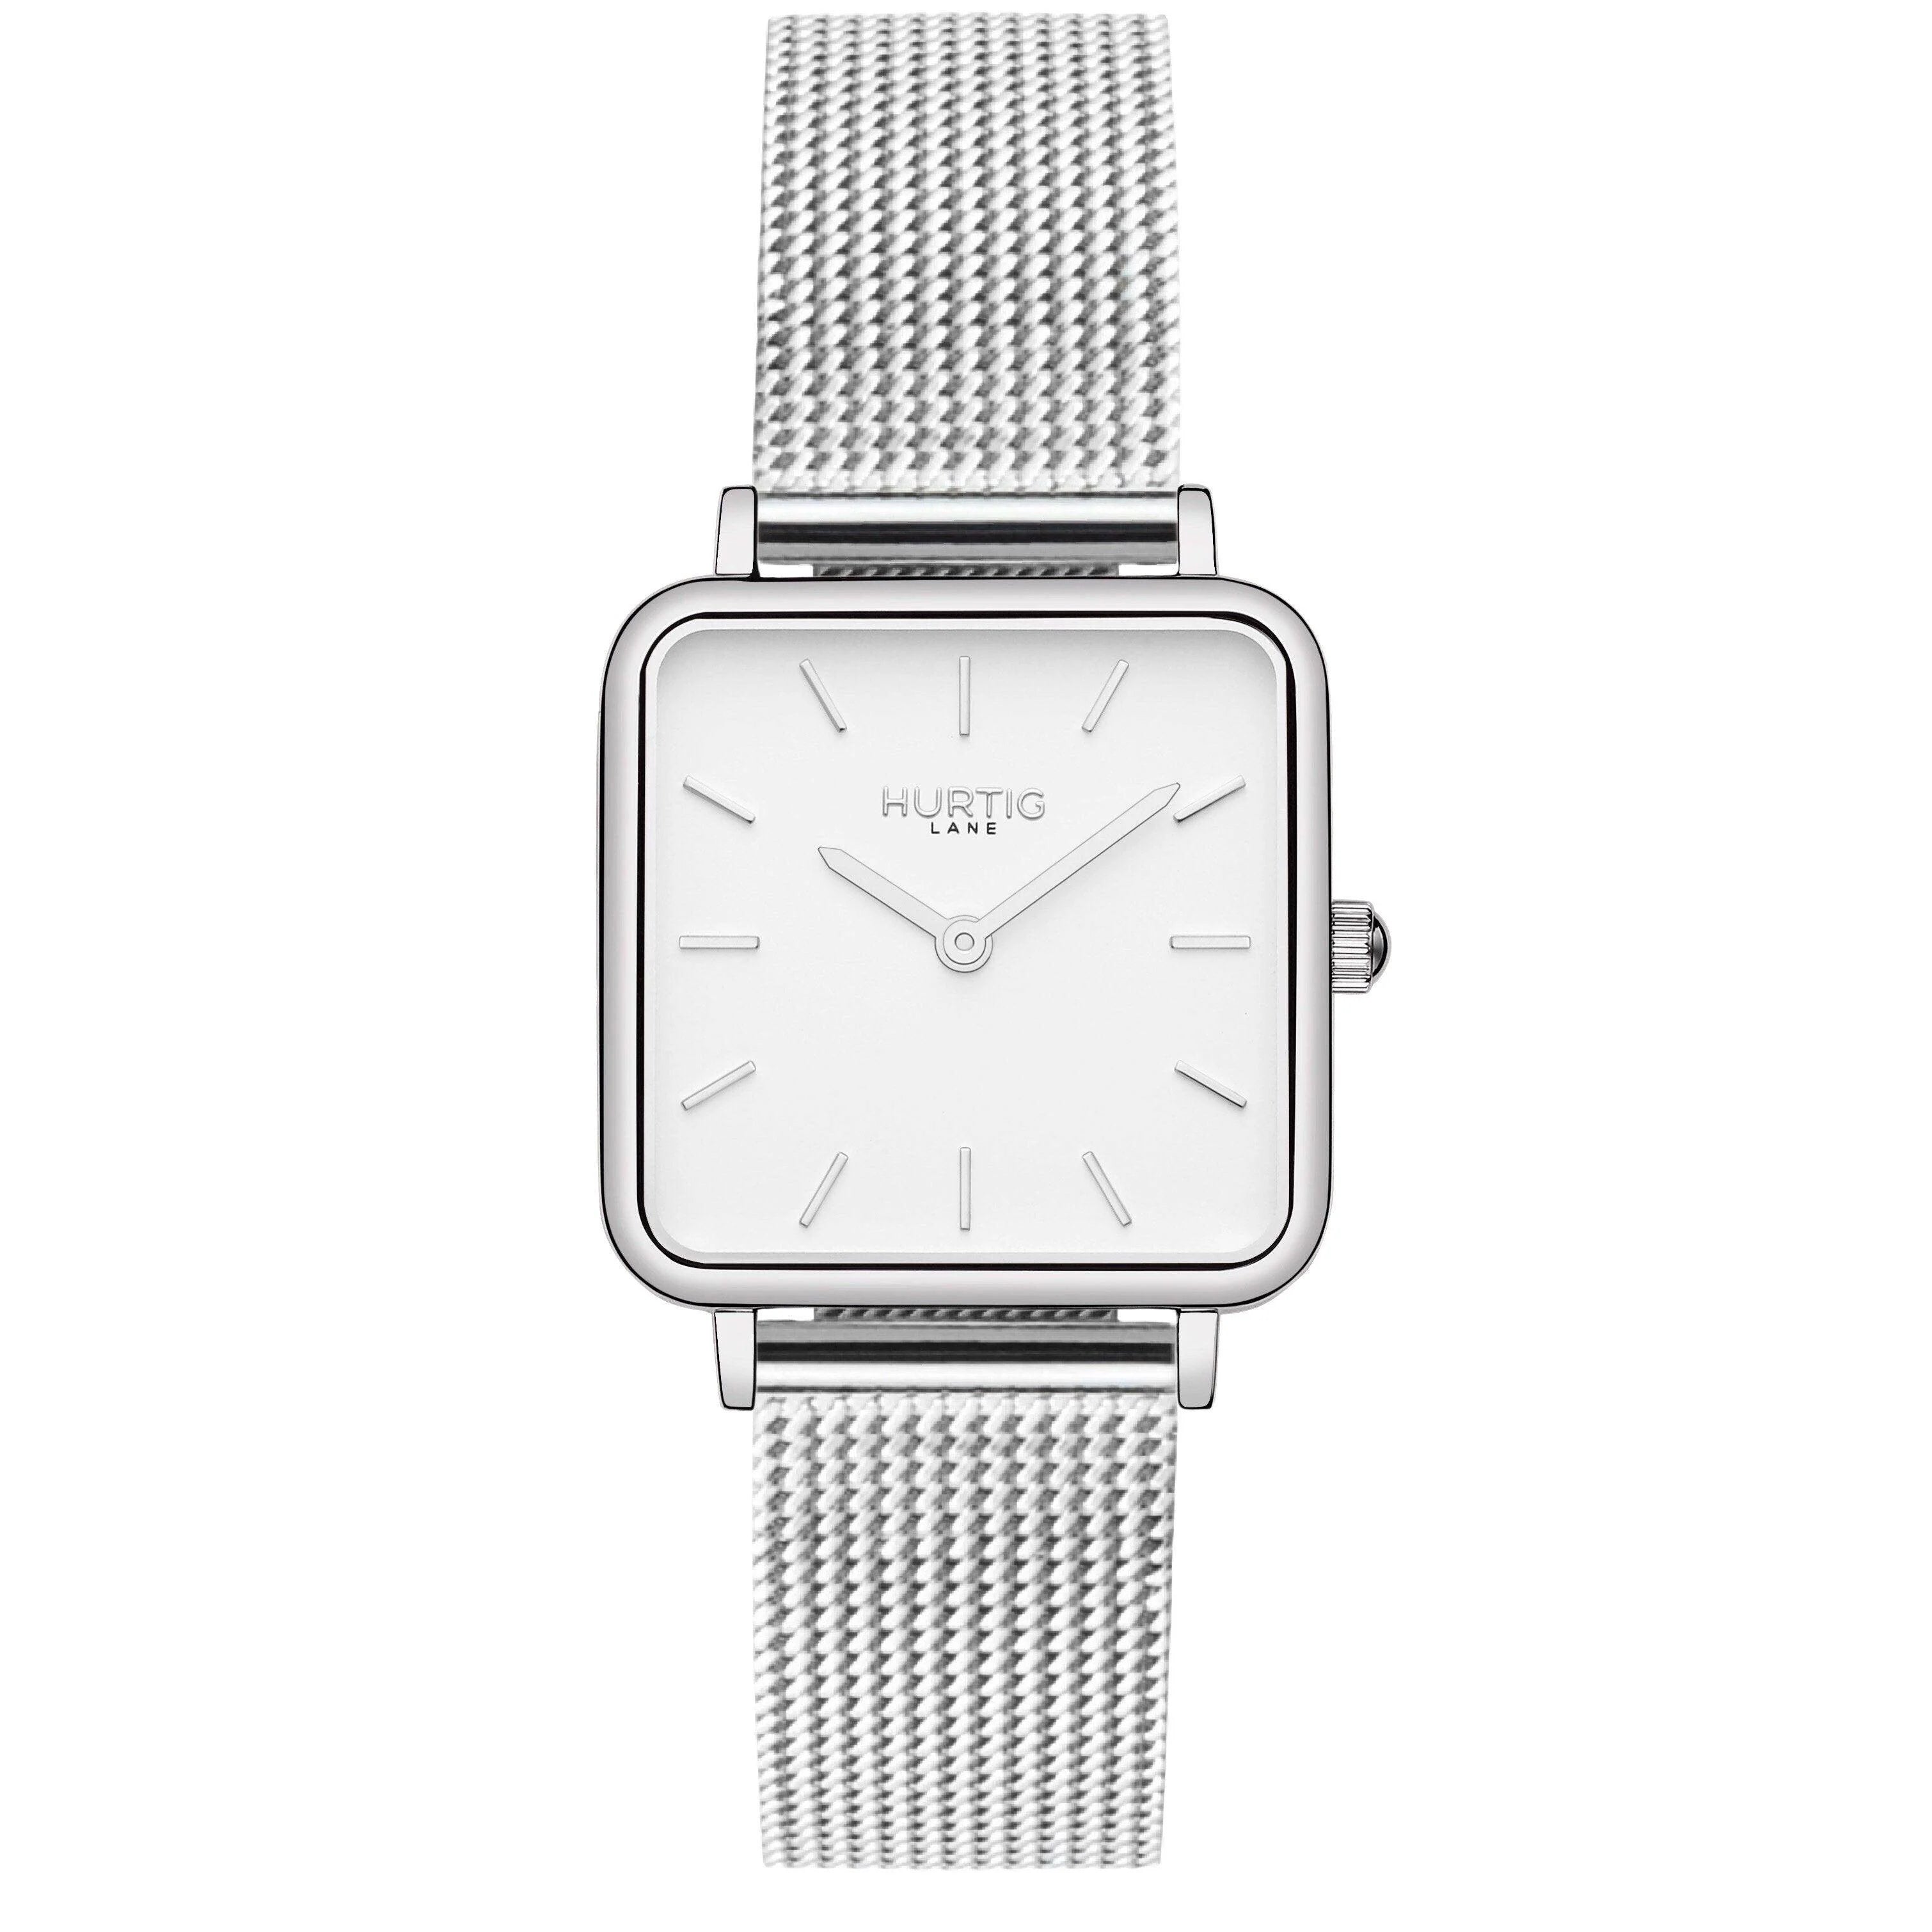 Neliö Square Stainless Steel Watch Silver, White & Silver